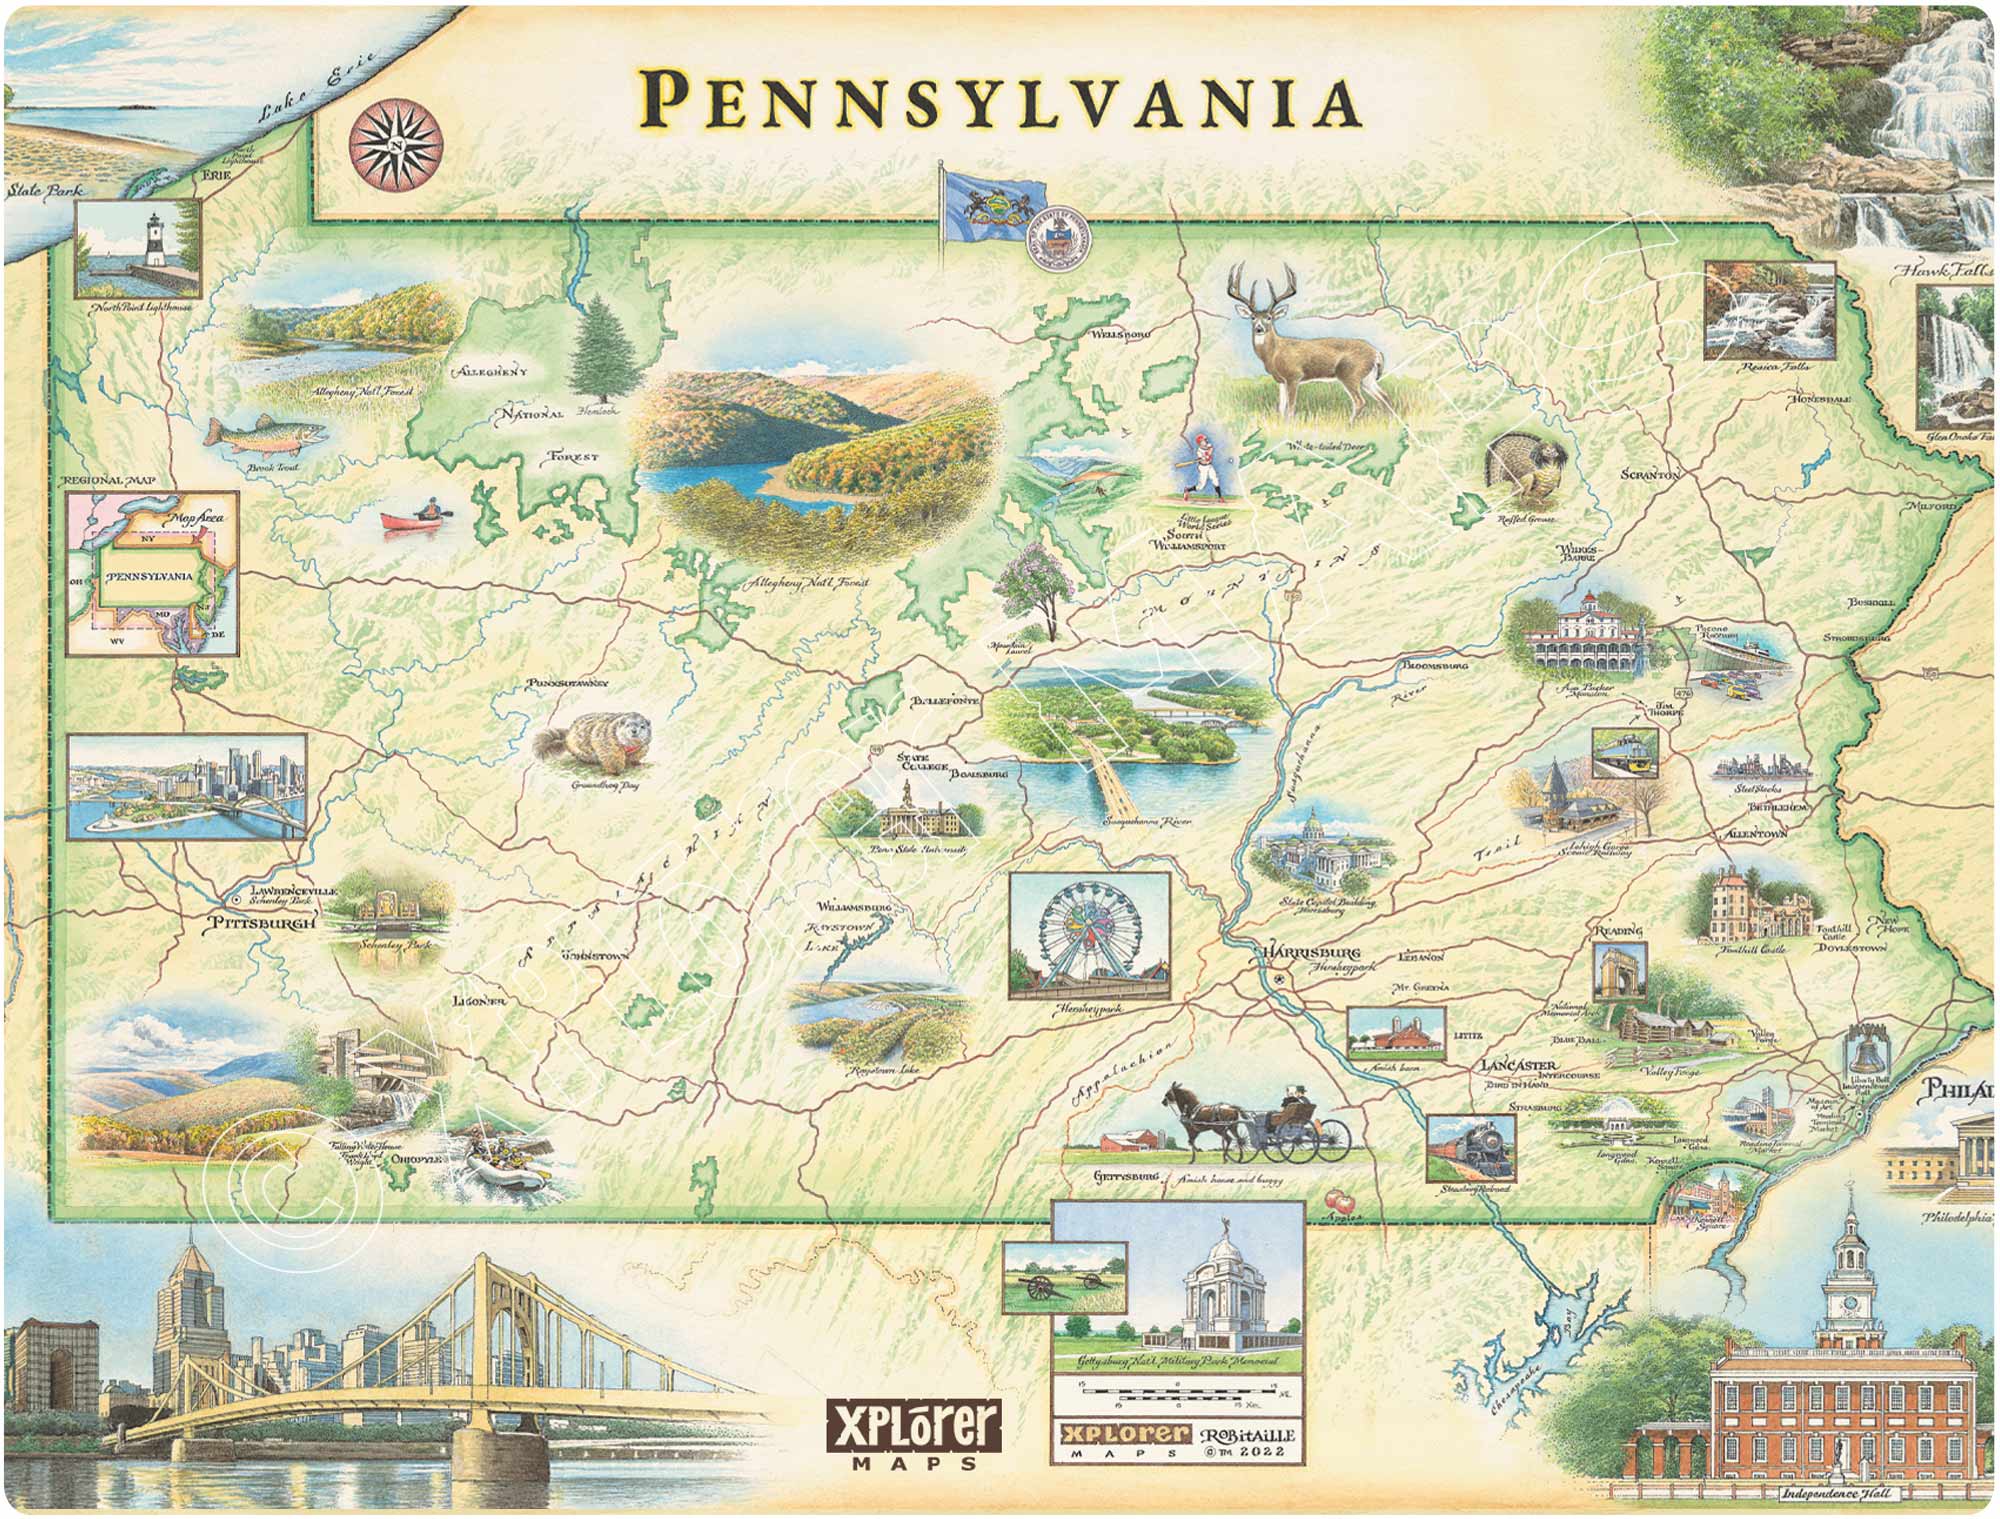 Pennsylvania State map wood sign by Xplorer Maps. Featuring Pittsburgh, Philadelphia, Philly, Amish Horse and buggy, ferris wheel, Capitol buildings, baseball, bridges and deer.